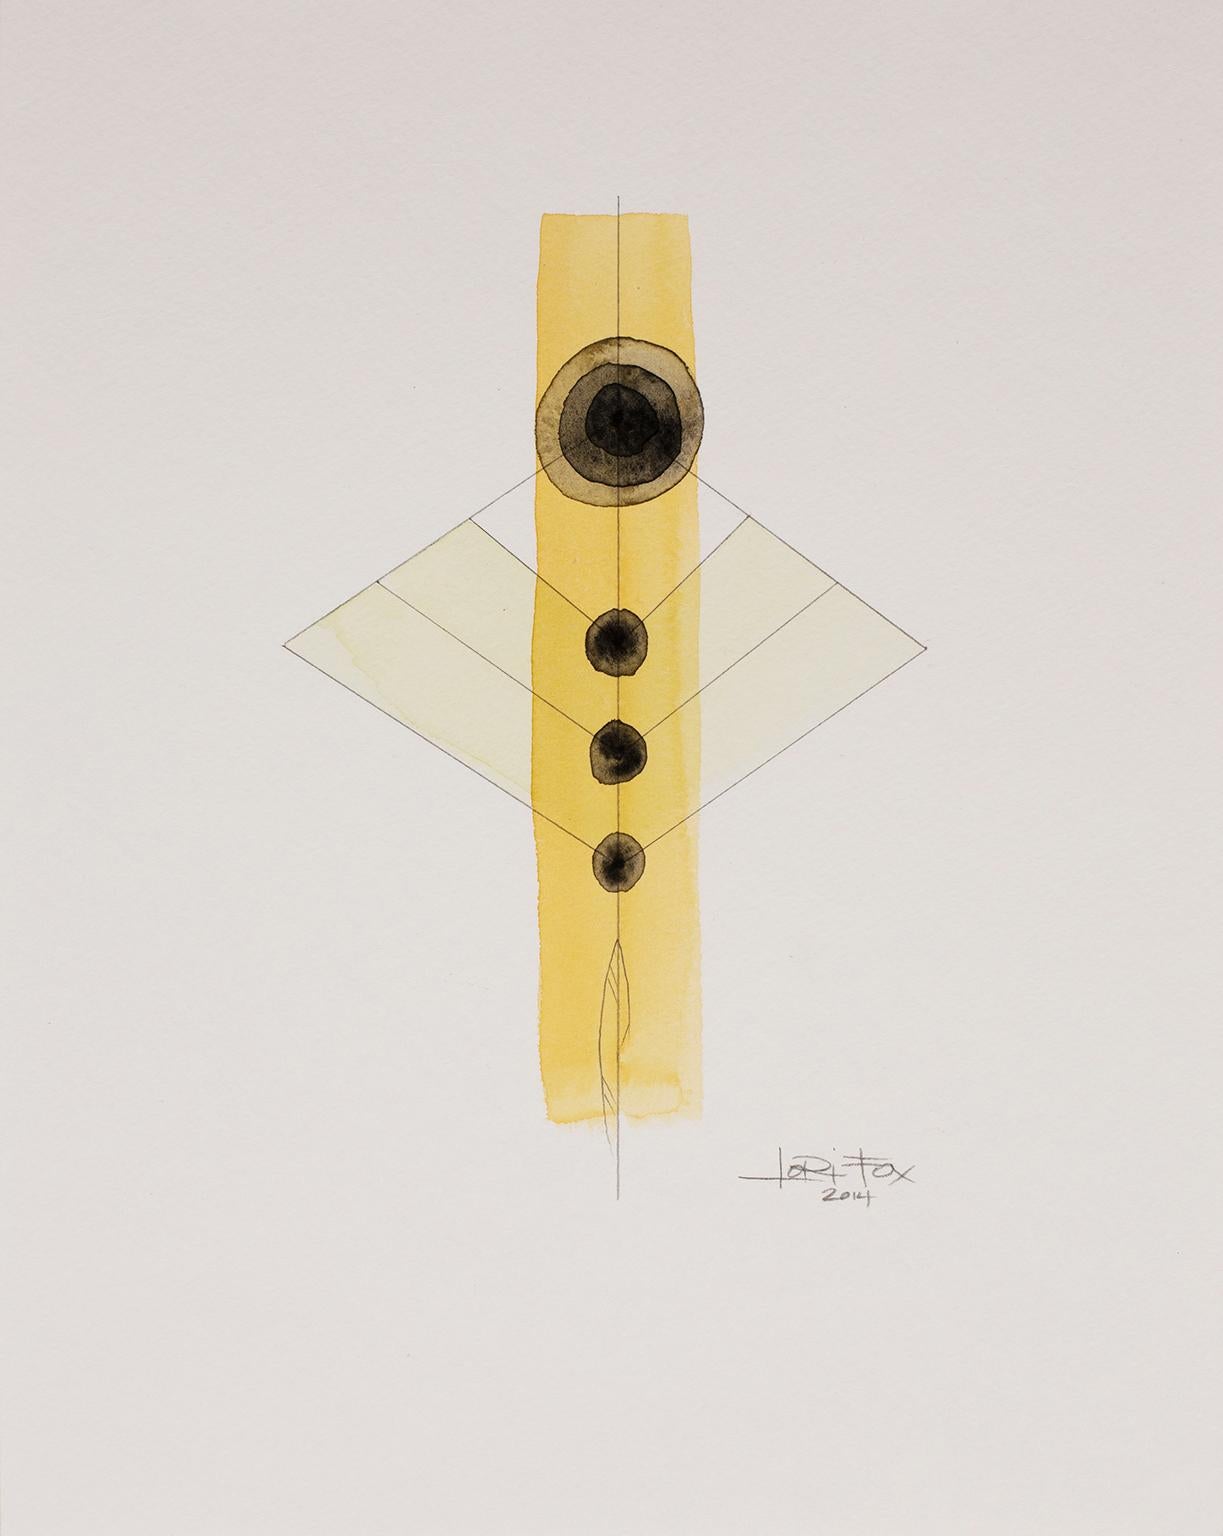 Totem 2.006. Abstract geometric forms. Pencil and watercolor. Black and yellow - Art by Lori Fox